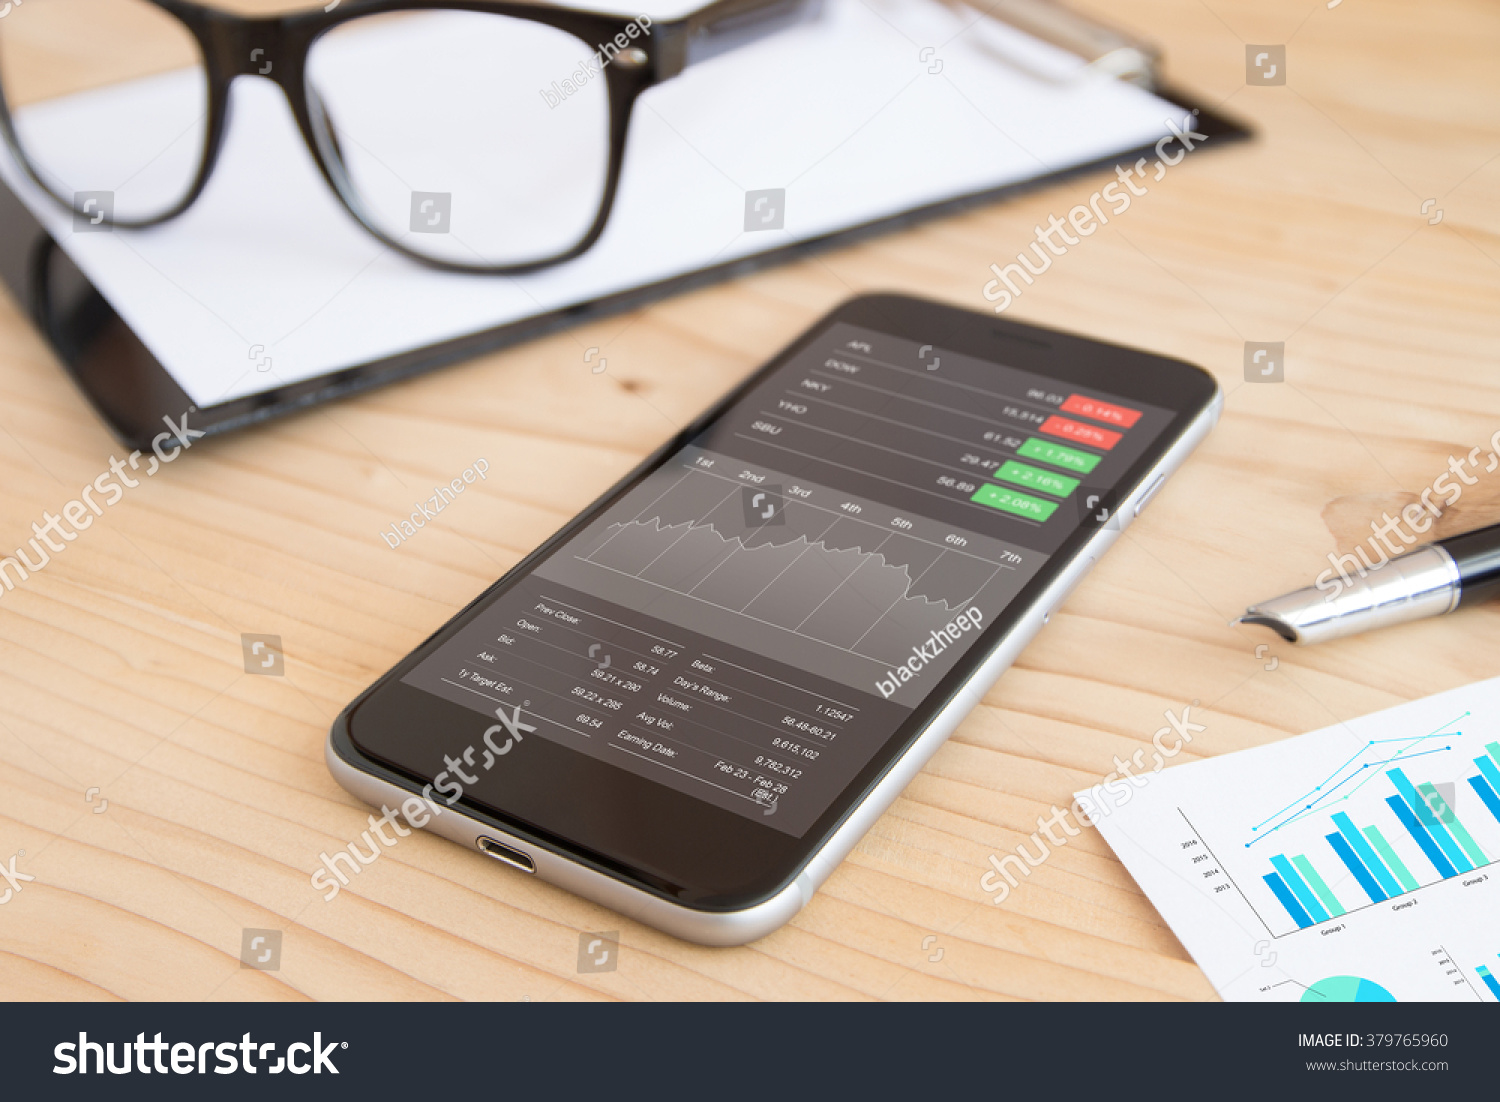 phone and business stock application on work desk #379765960